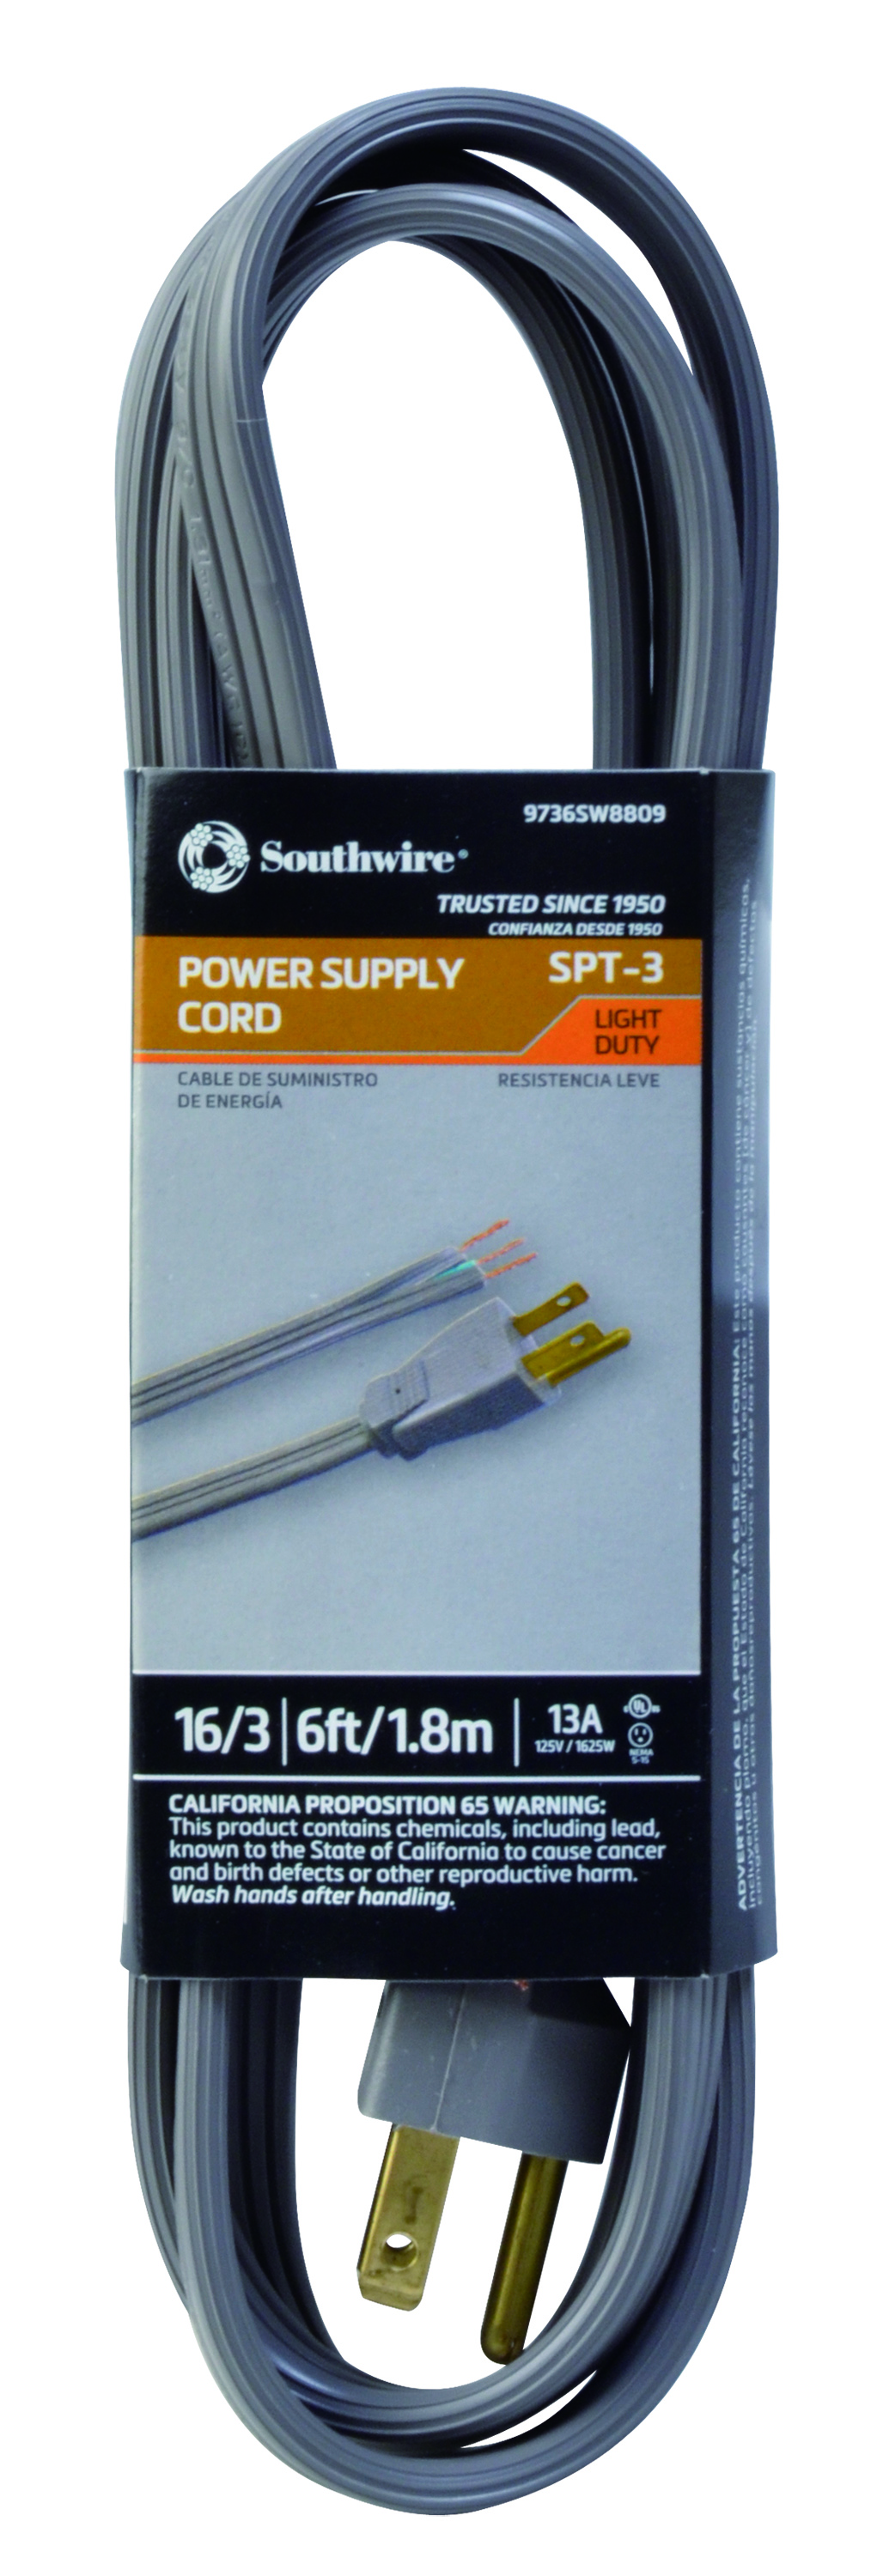 097368809 - 6' Appliance Cord Straight - Cables & Cords